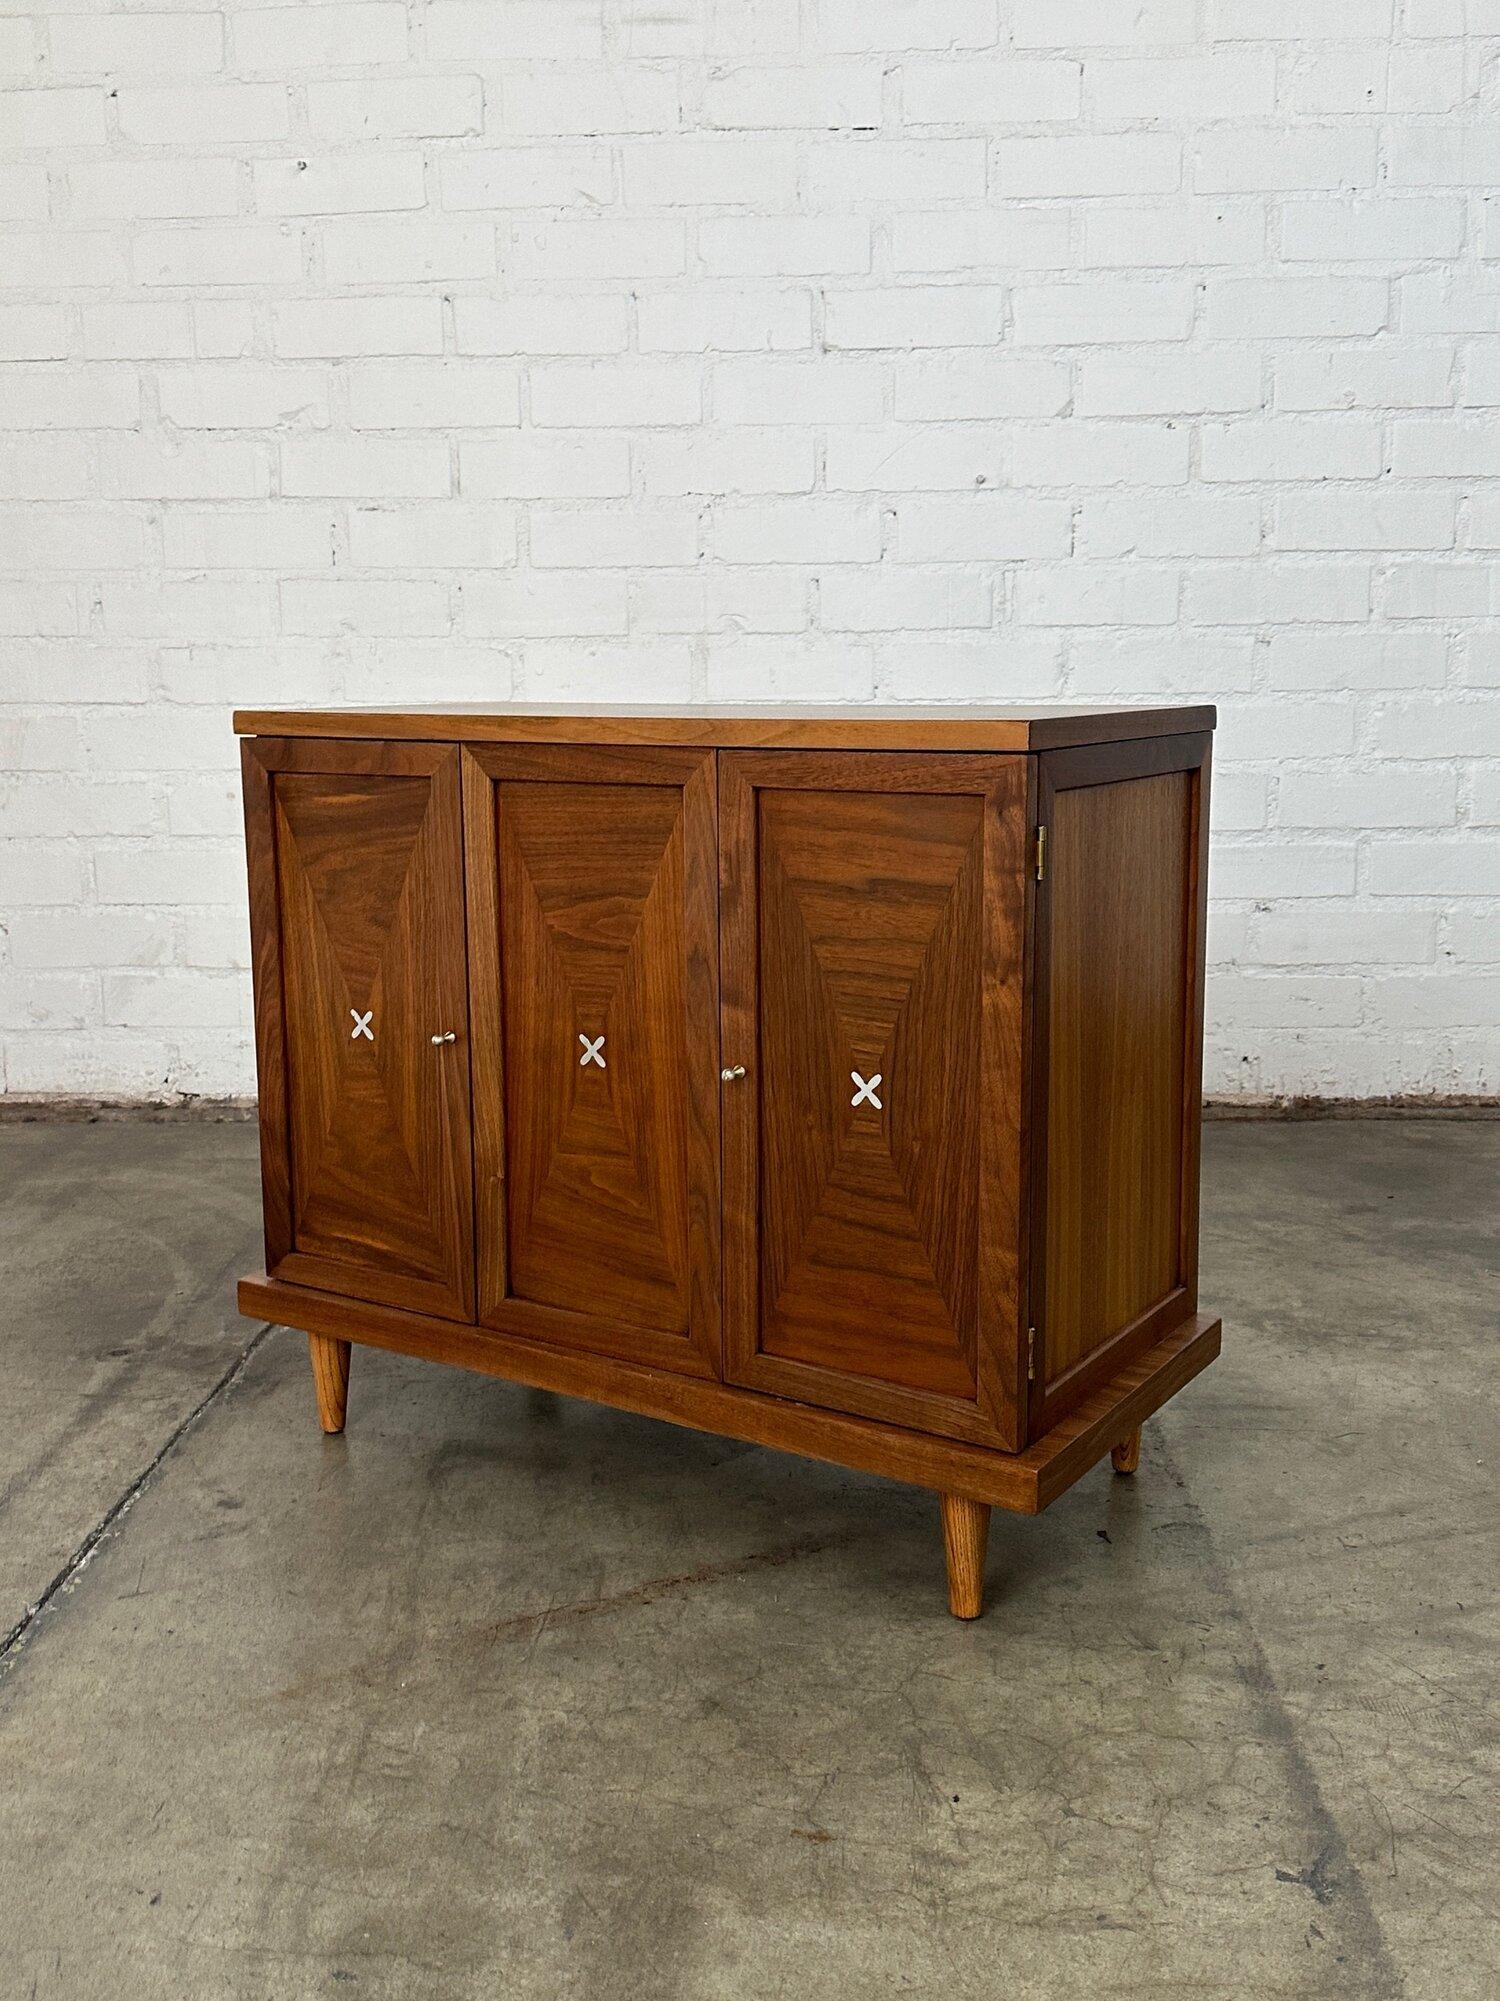 W31 D14.75 H26.5

Space under shelf H15

Compact credenza in fully restored conditon. Item features inliad aluminum,  contrasting grain, and orginal hardware. Item is structurally sound and fully functional.